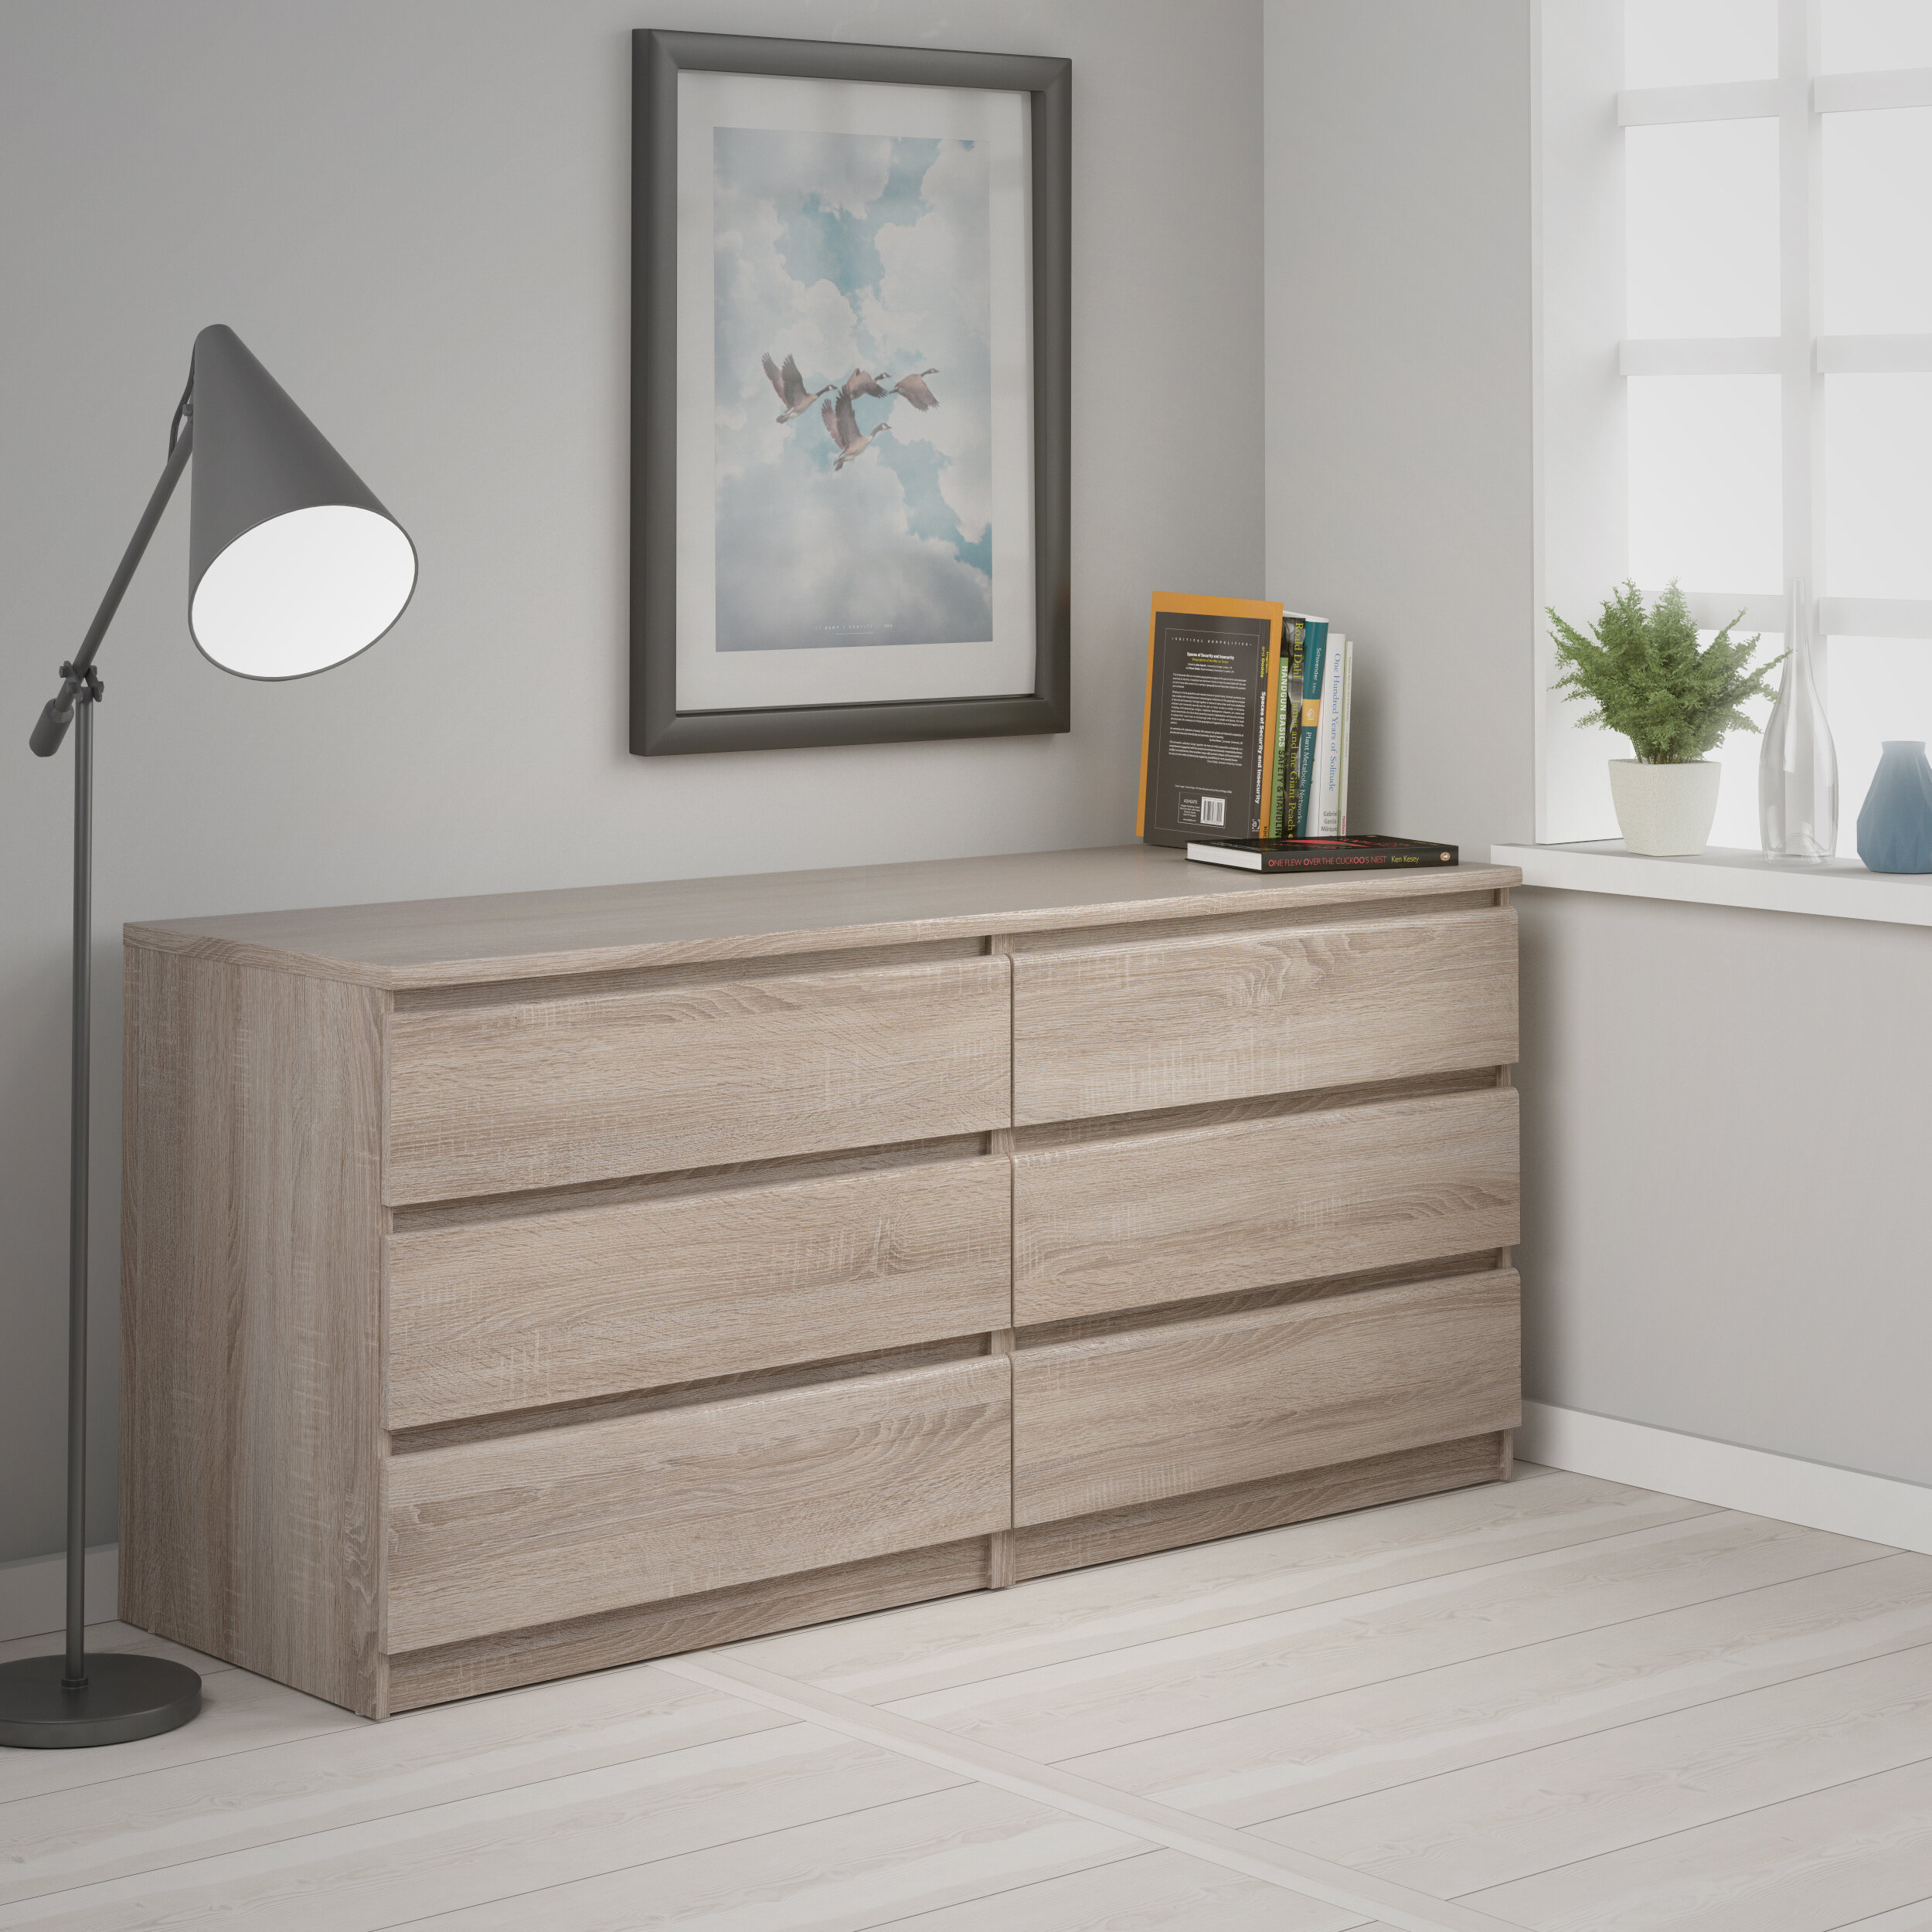 Extra Deep Drawers Dressers Chests You Ll Love In 2021 Wayfair